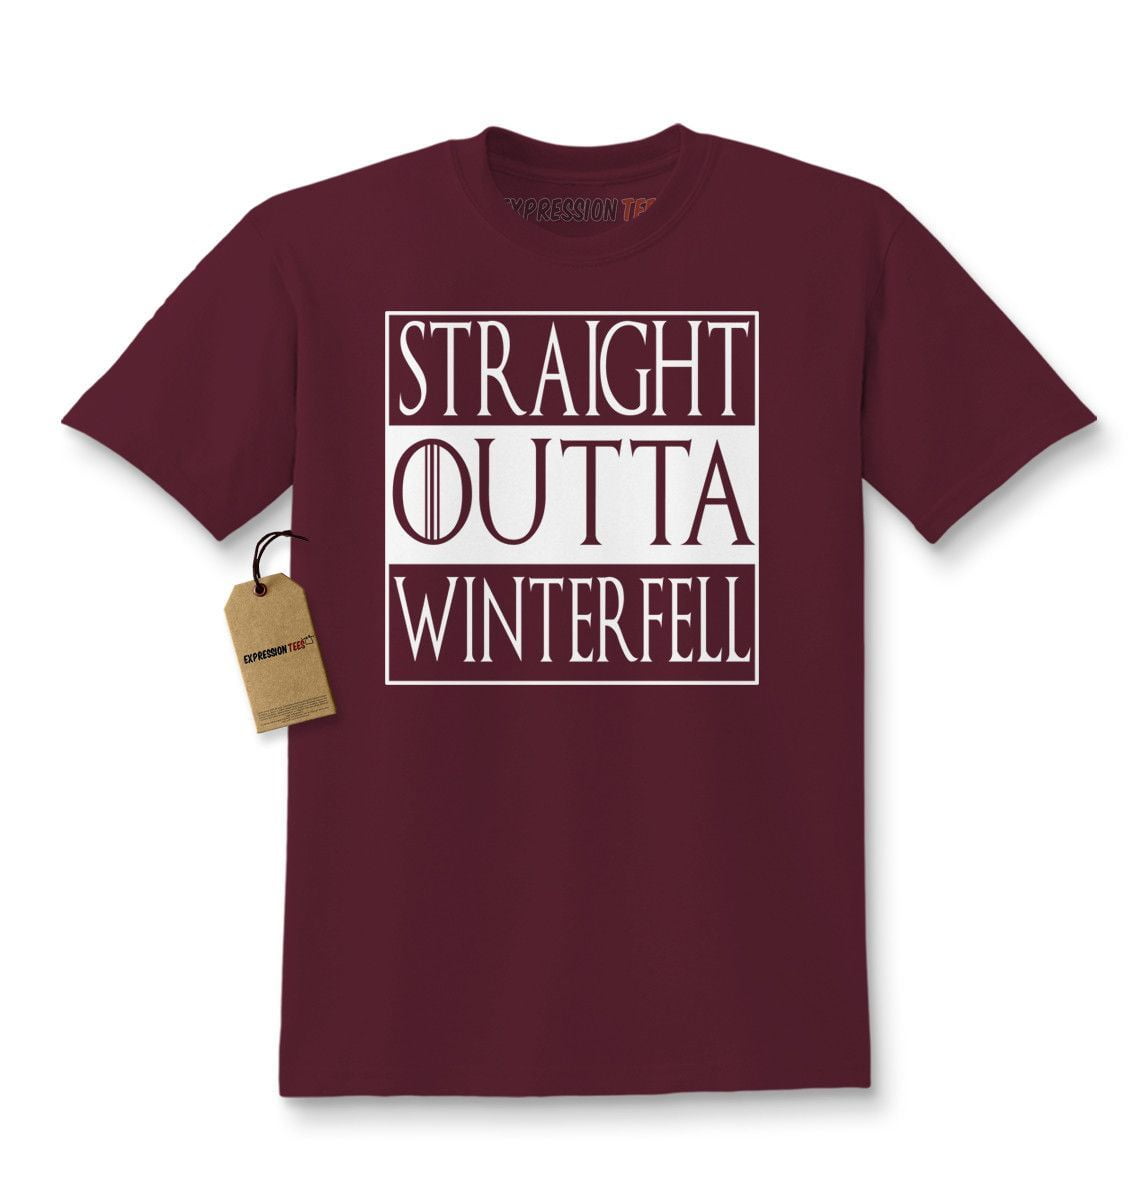 Expression Tees Straight Outta Winterfell Kids T Shirt Walmart Com - roblox t shirts images strach